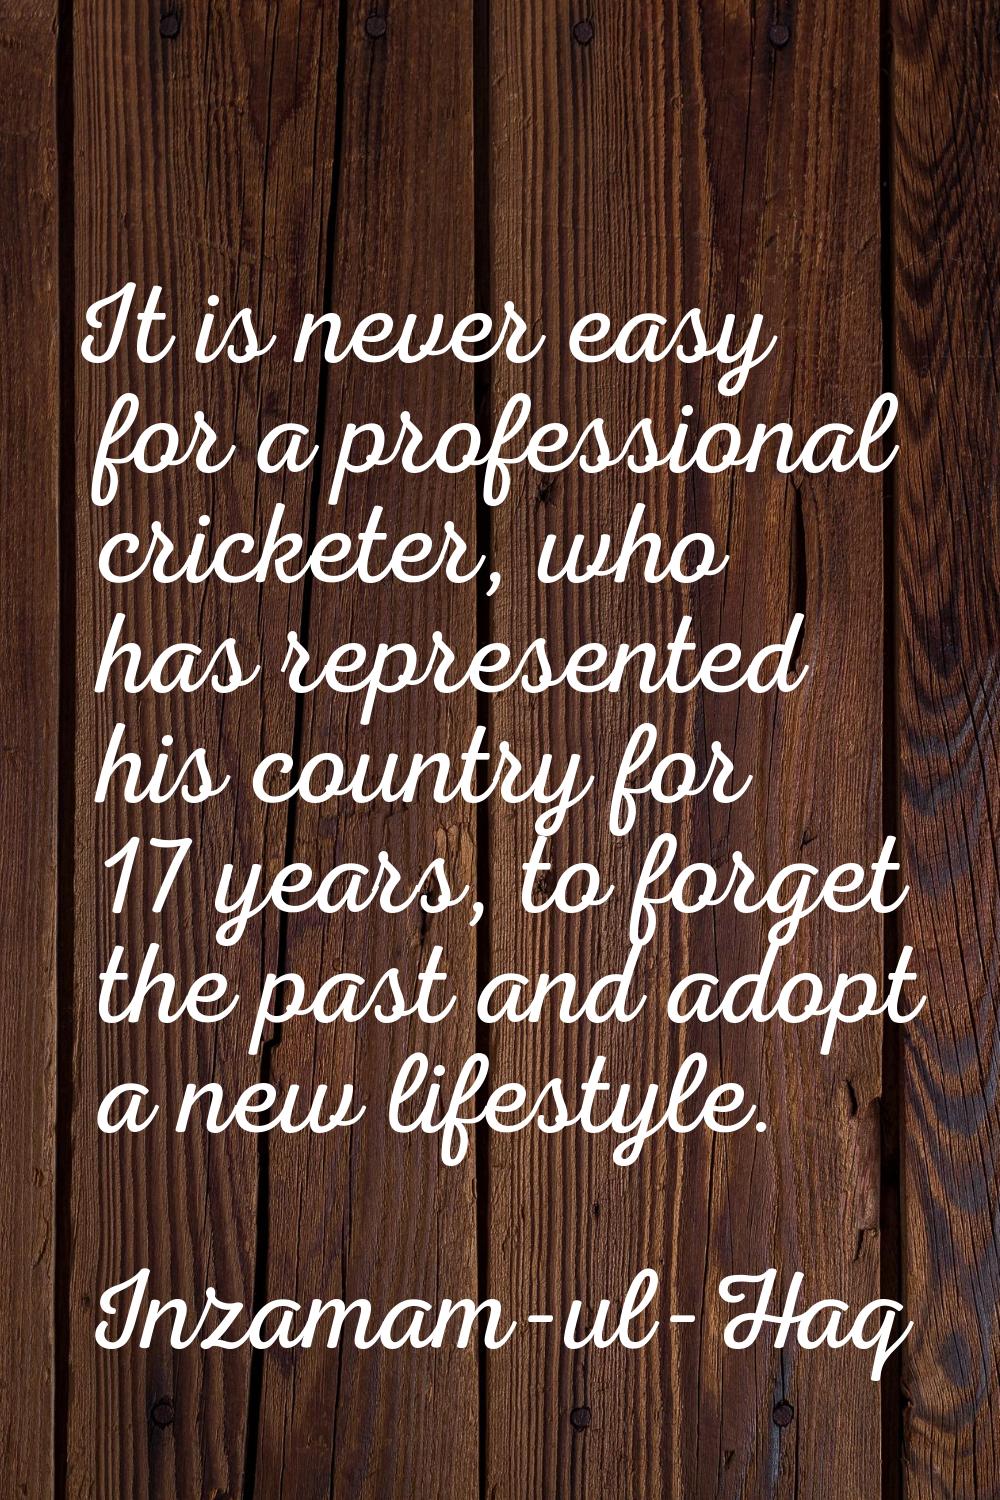 It is never easy for a professional cricketer, who has represented his country for 17 years, to for